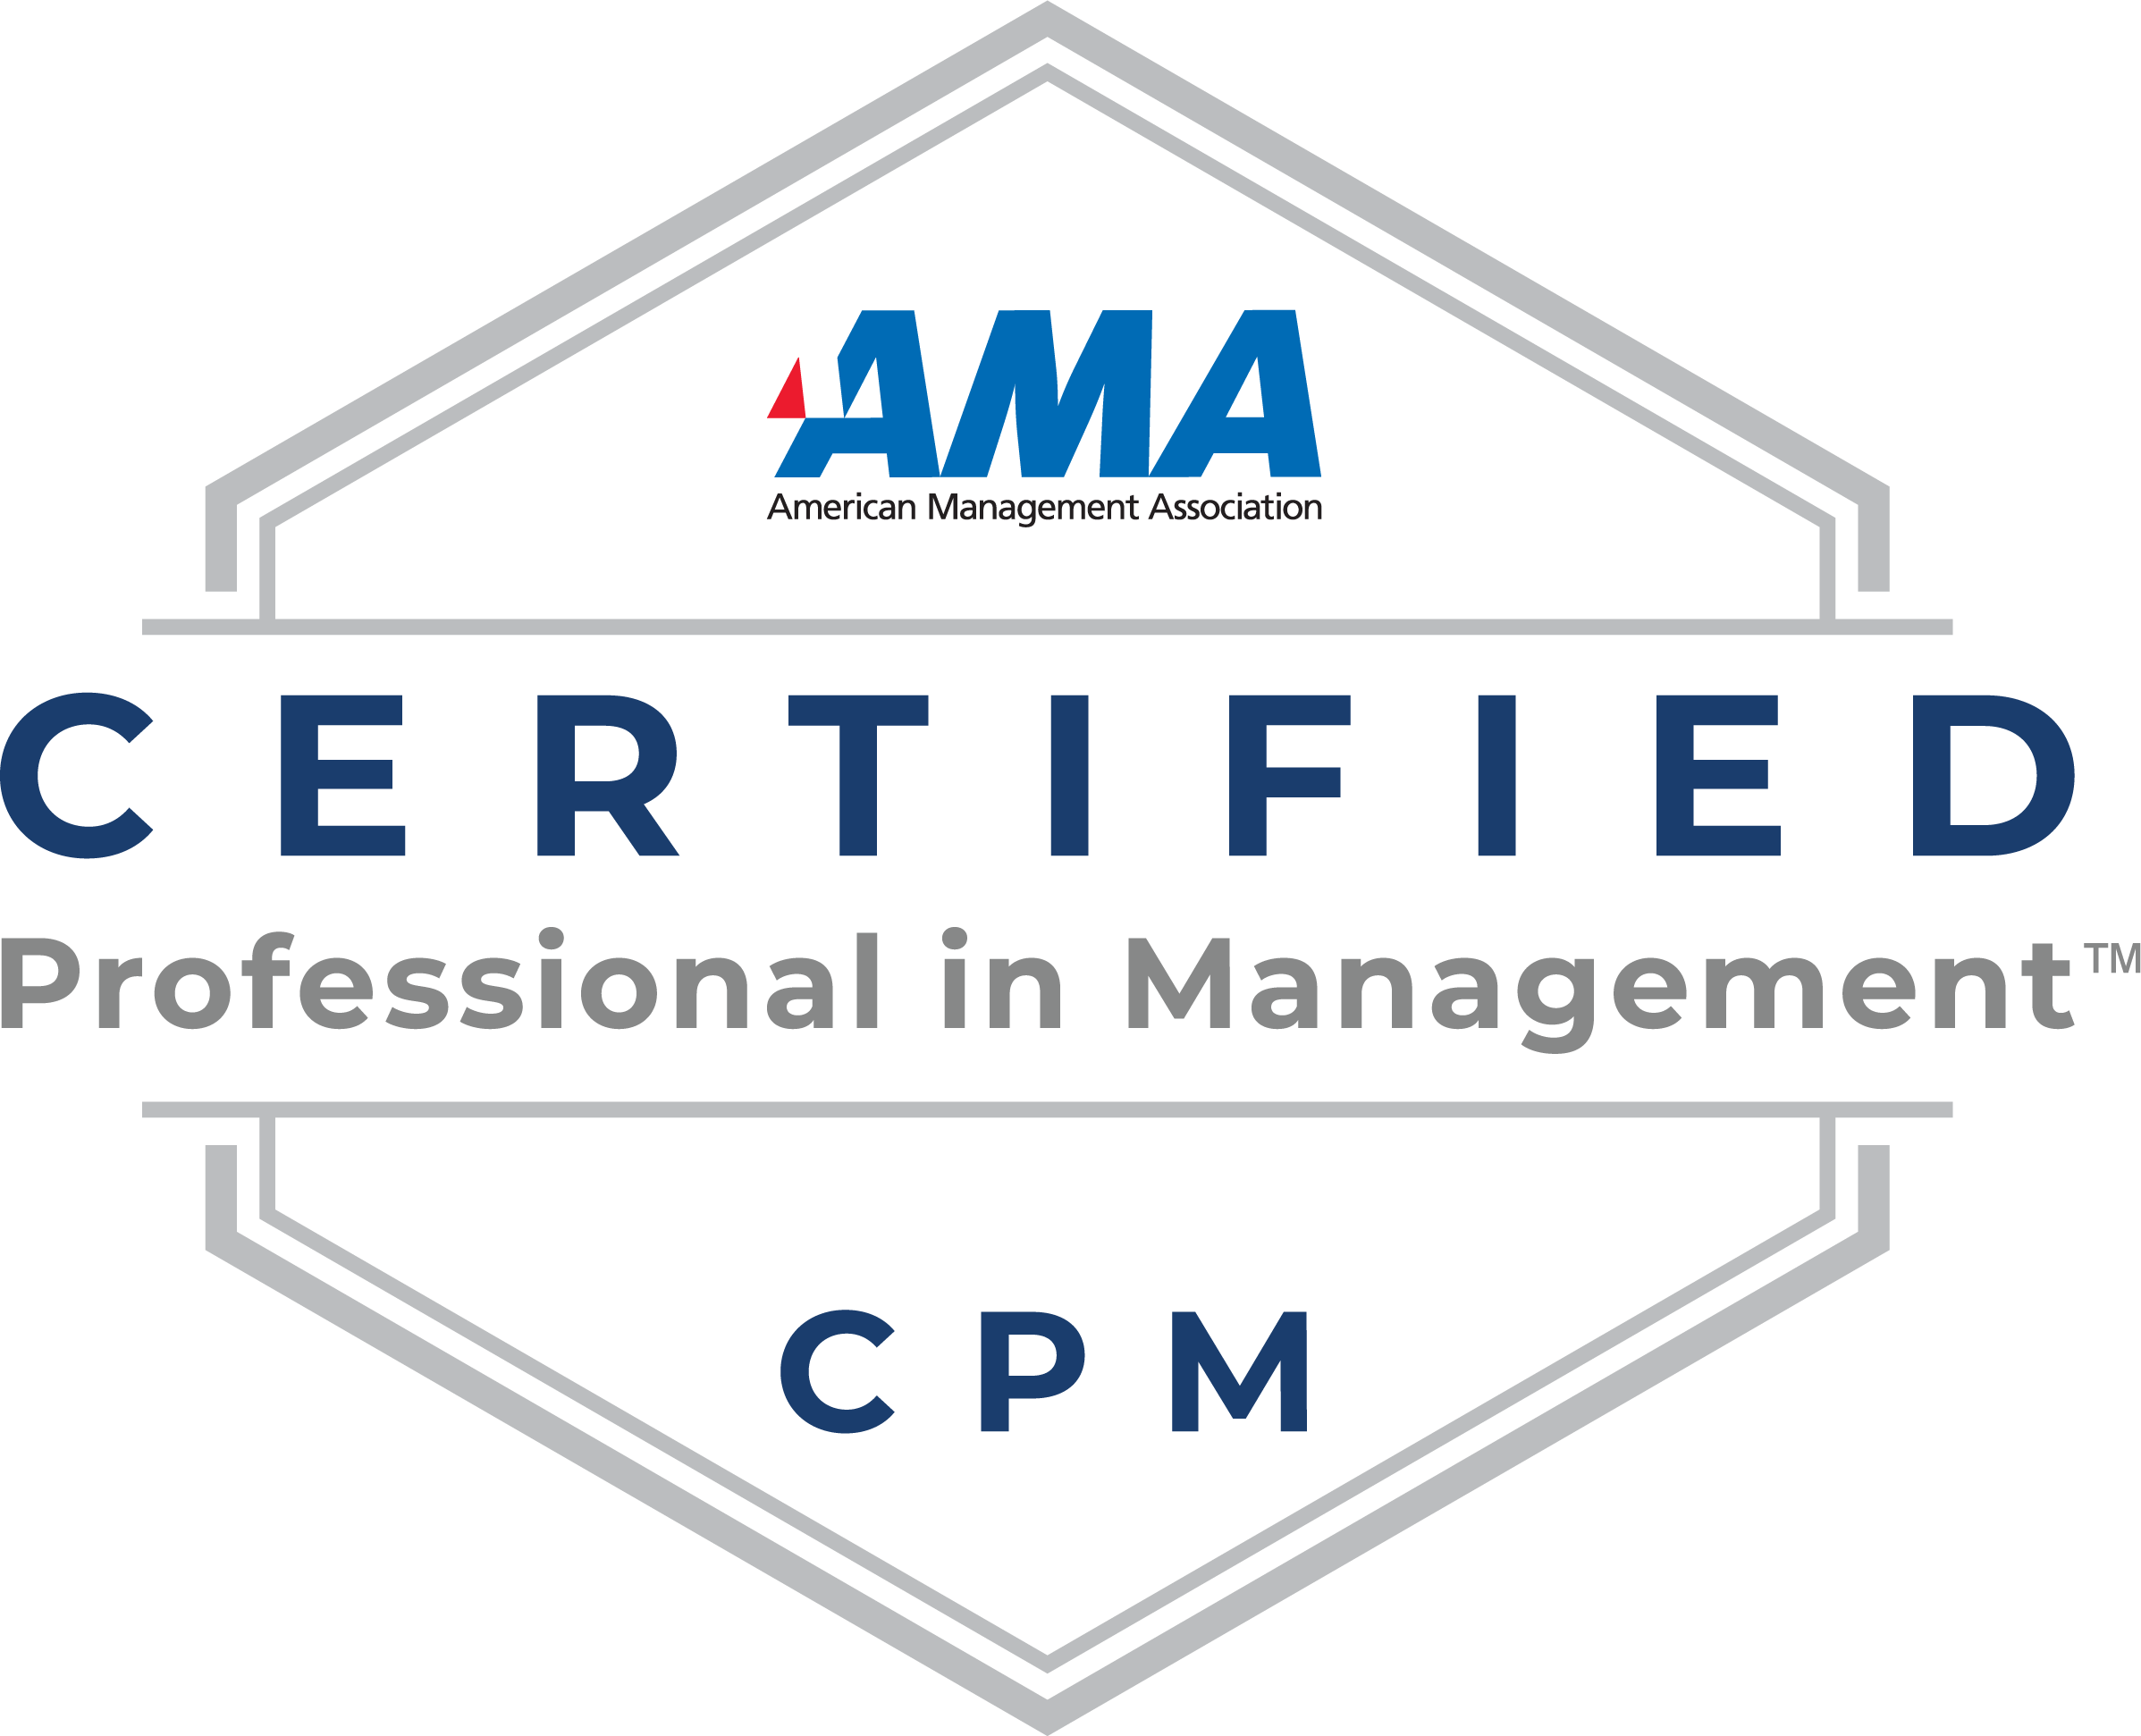 About Certified Professional in Management Canadian Management Centre